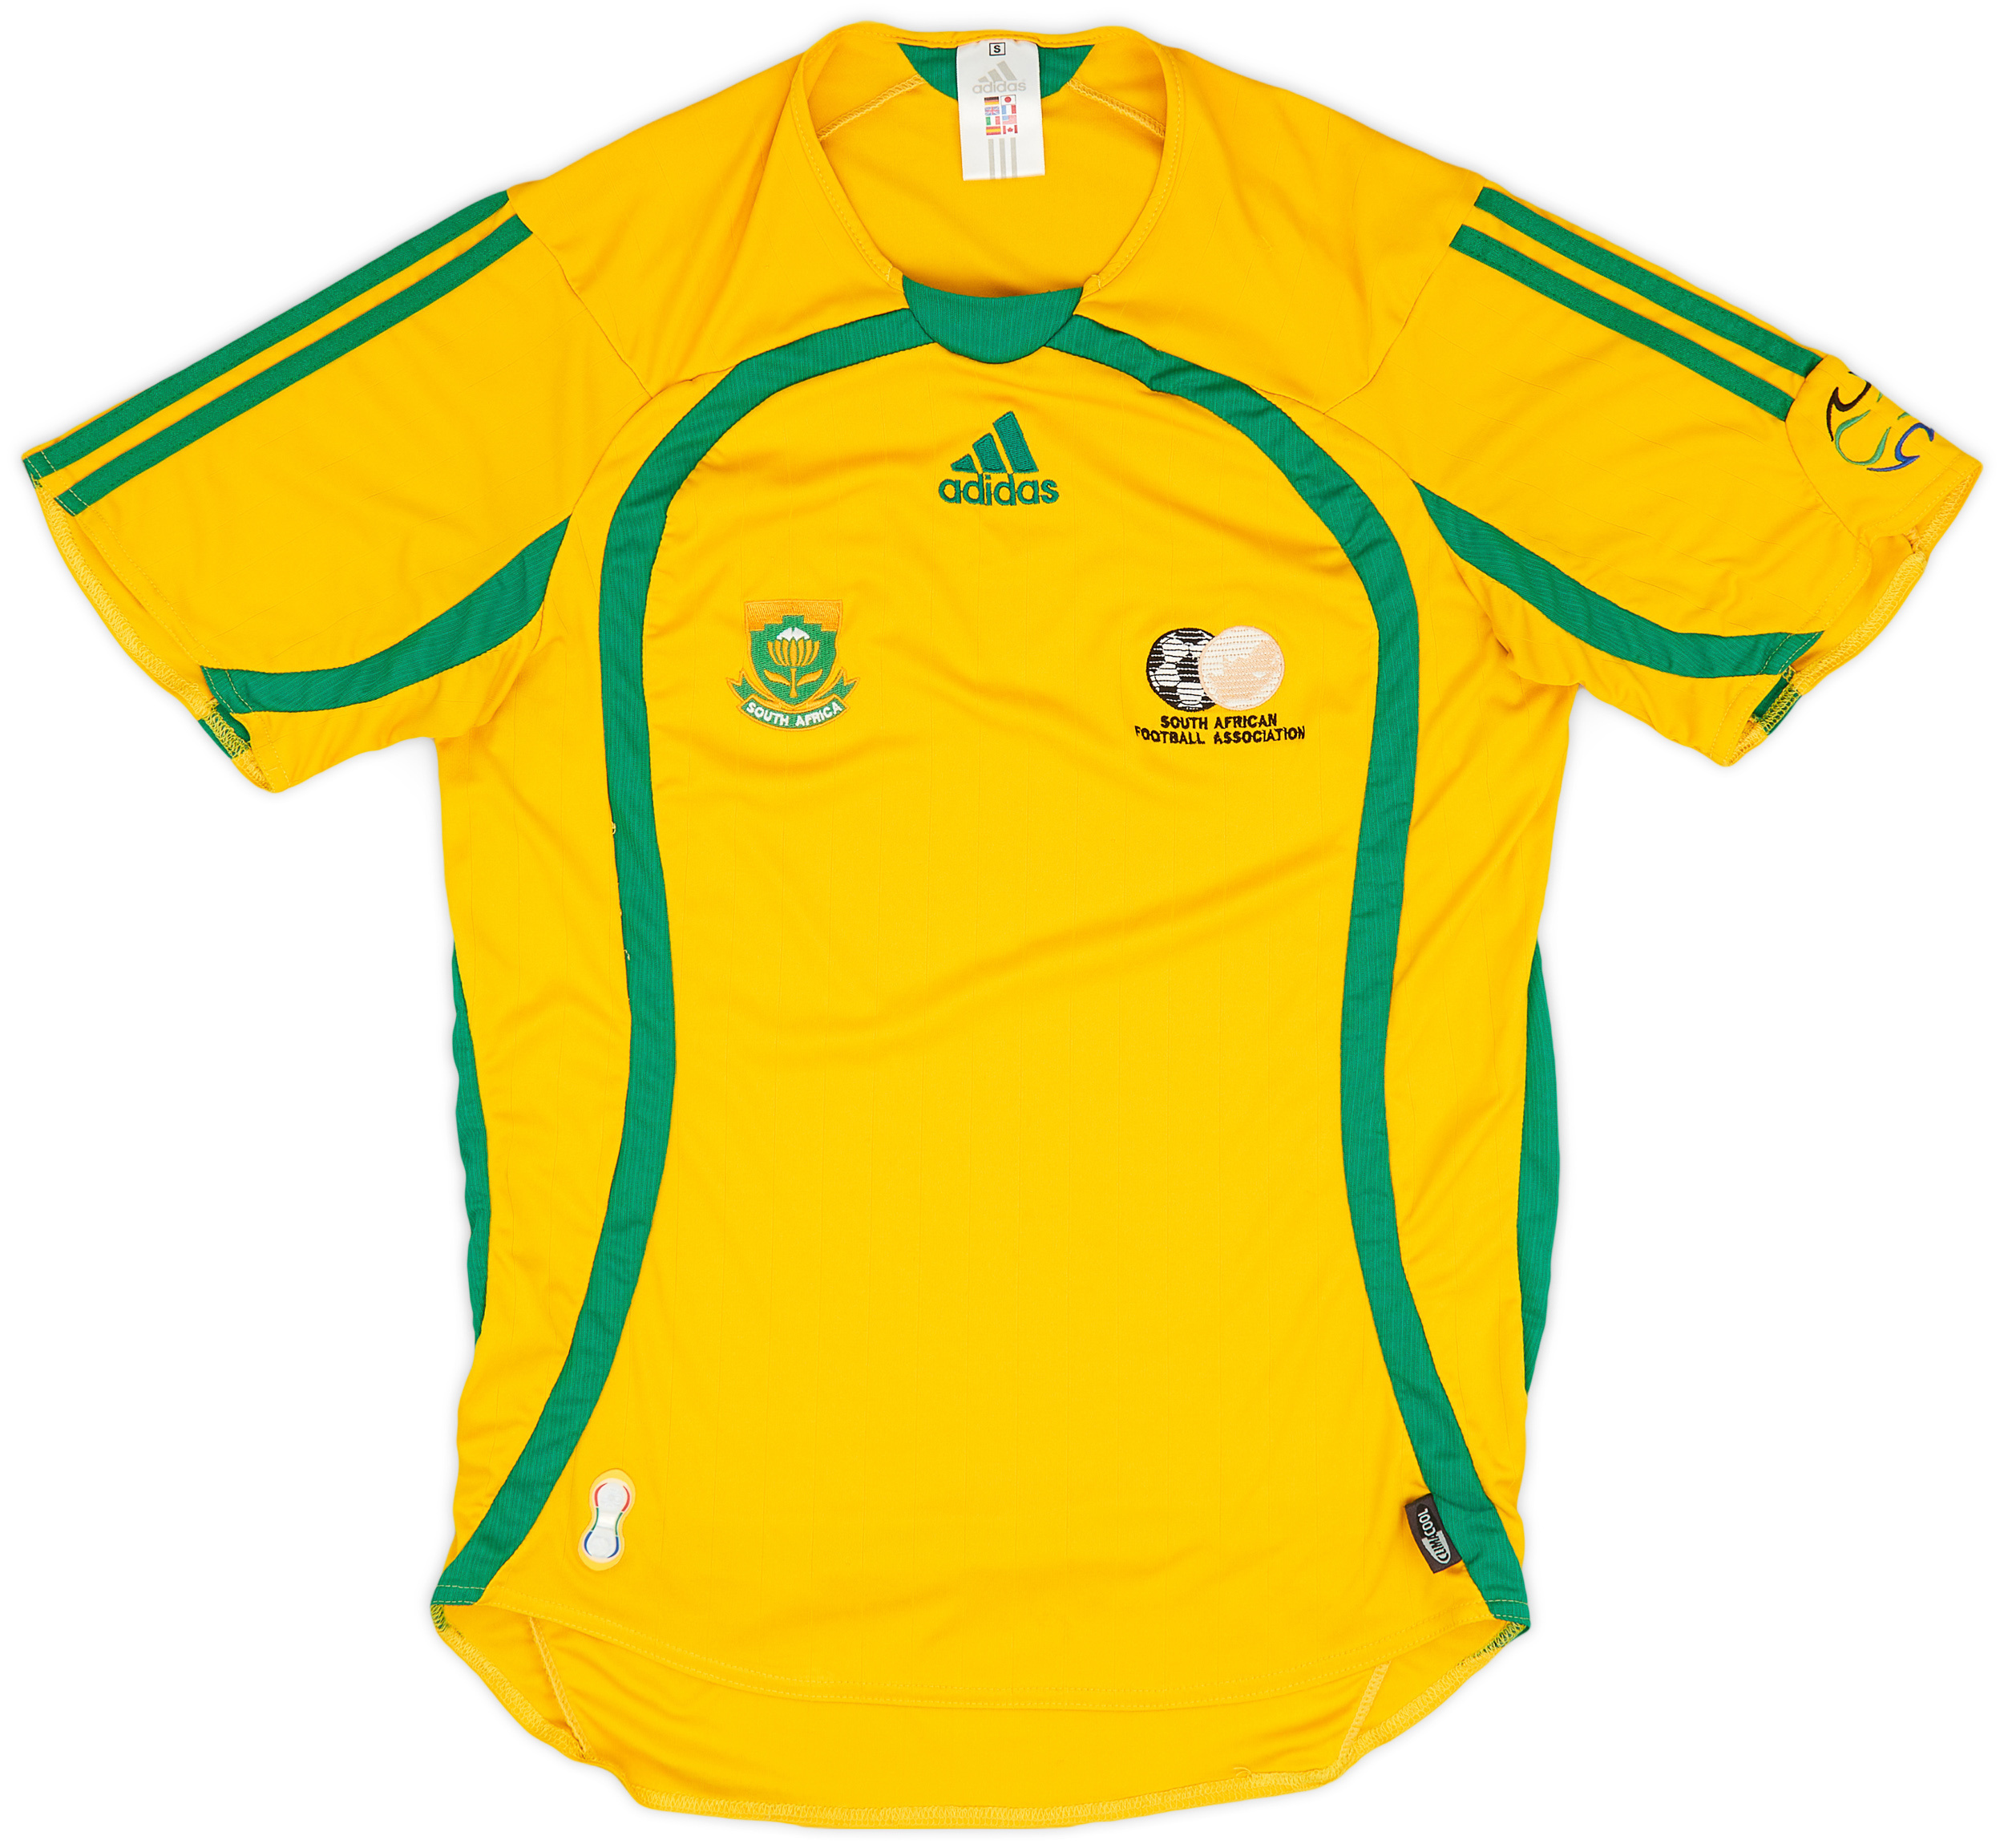 2006-09 South Africa Home Shirt - 8/10 - ()